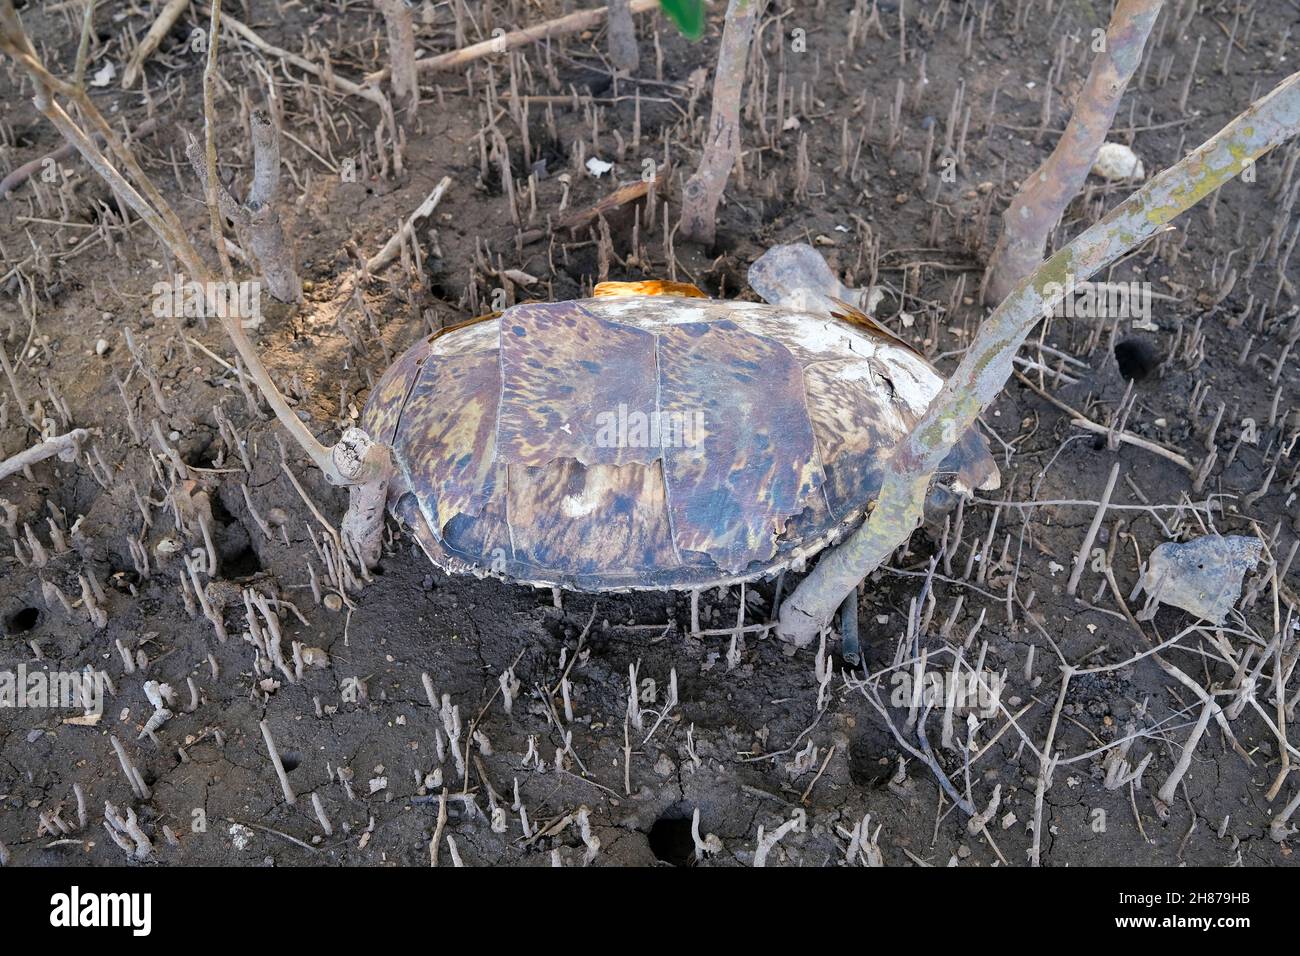 Carapace of a green sea turtle, Chelonia mydas, in the mangrove. This sea turtle is listed as endangered. Stock Photo